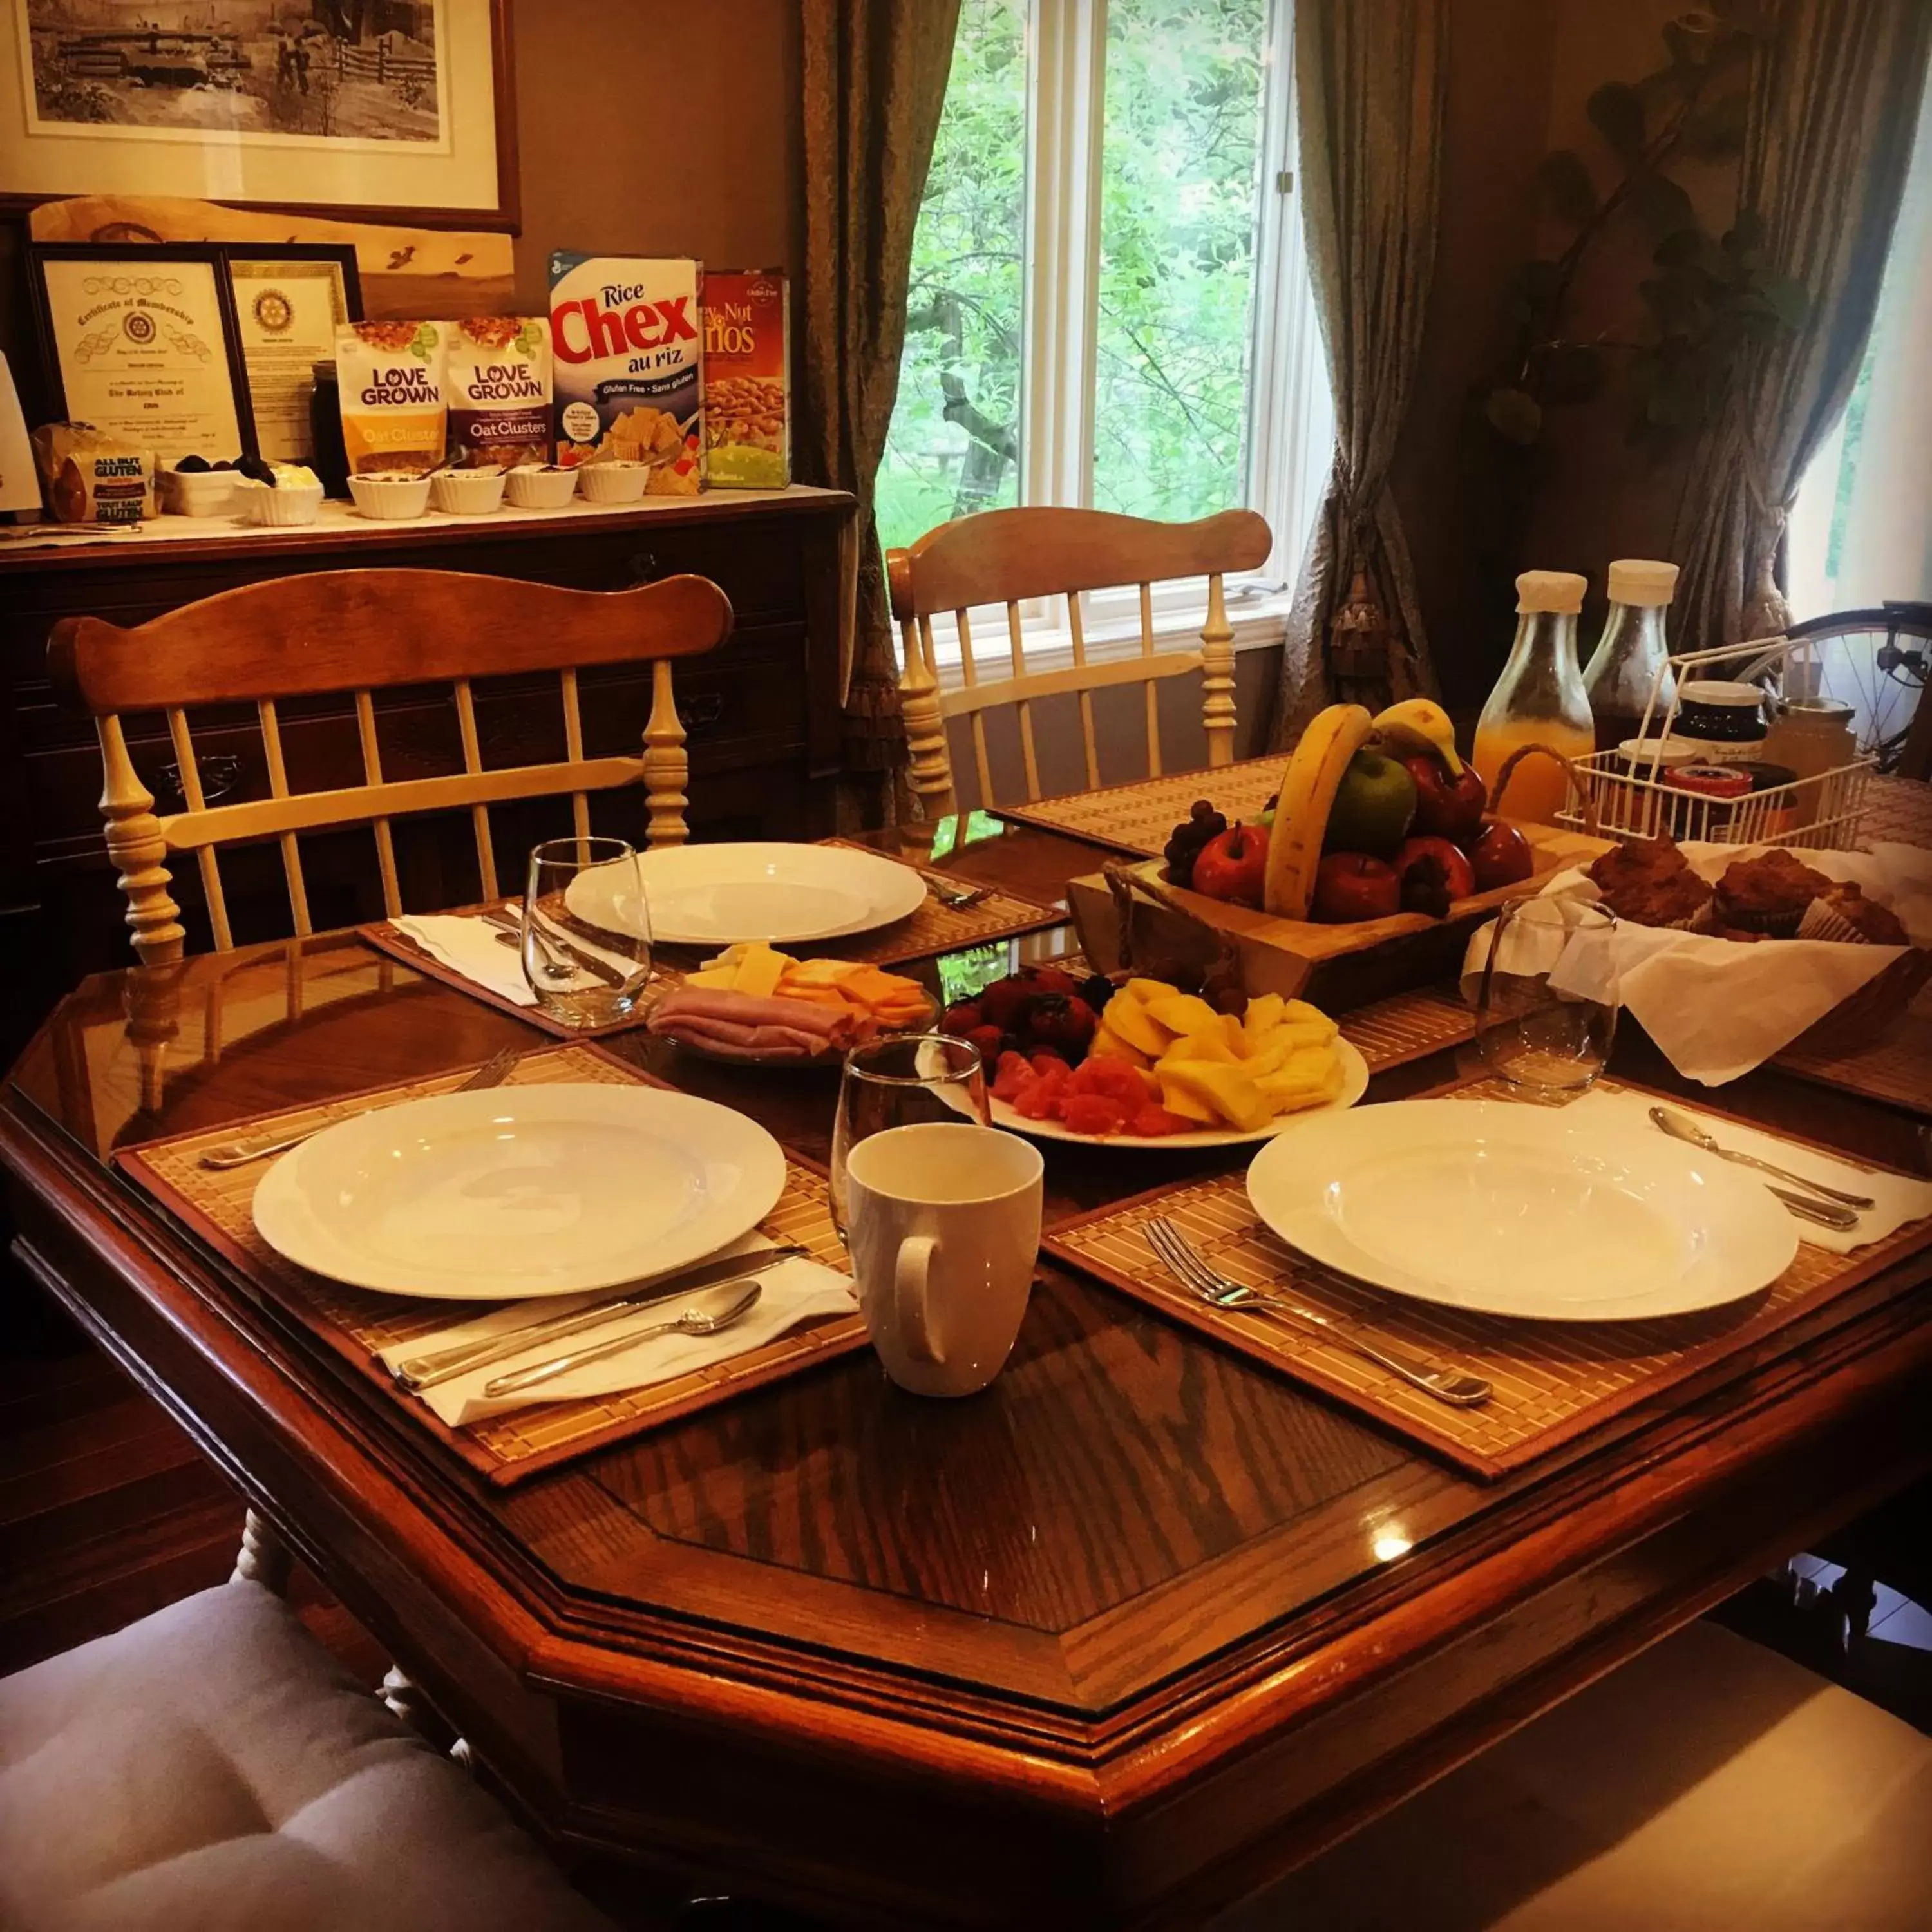 Food and drinks in Tailwinds B&B